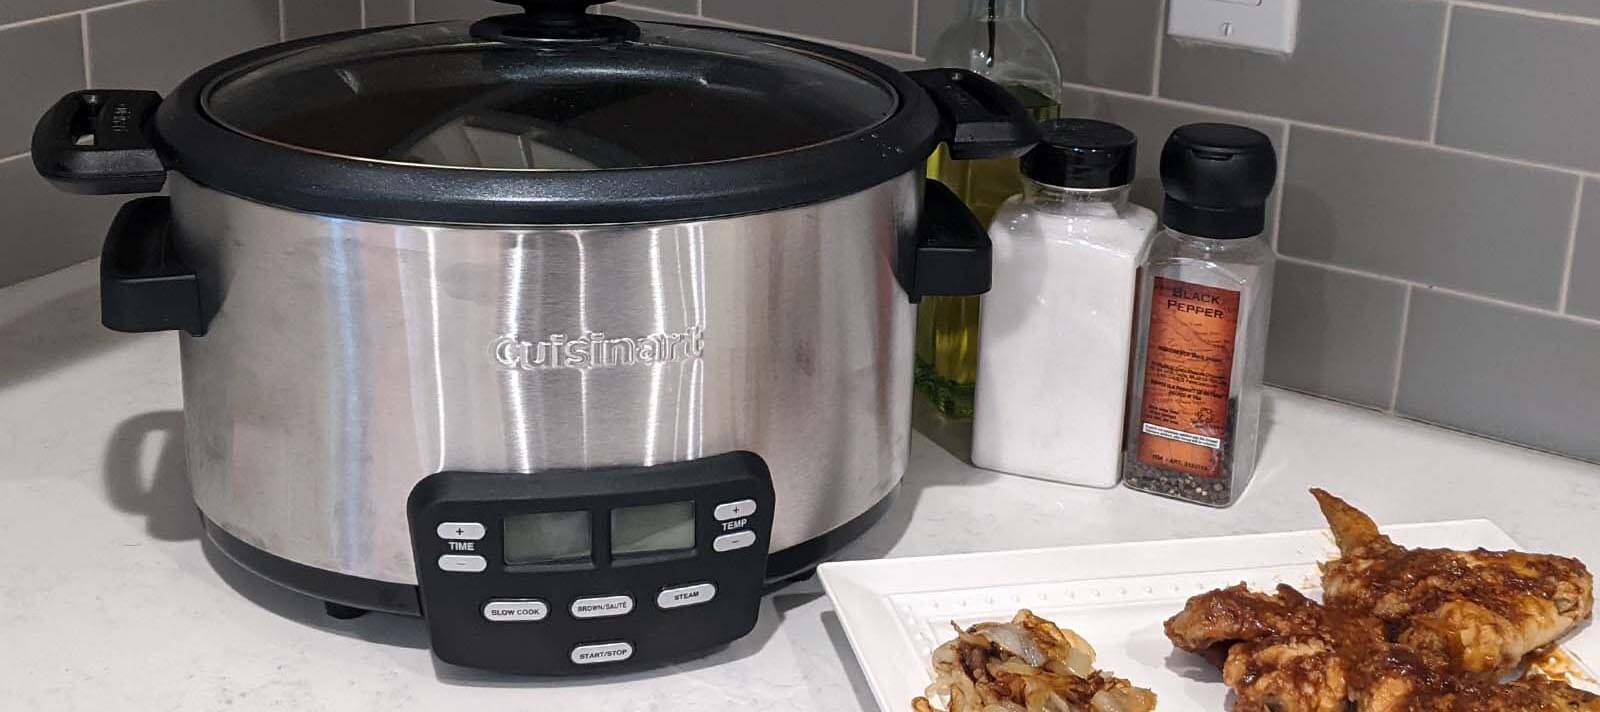 Can I sauté ingredients before using the Pressure or Slow Cook